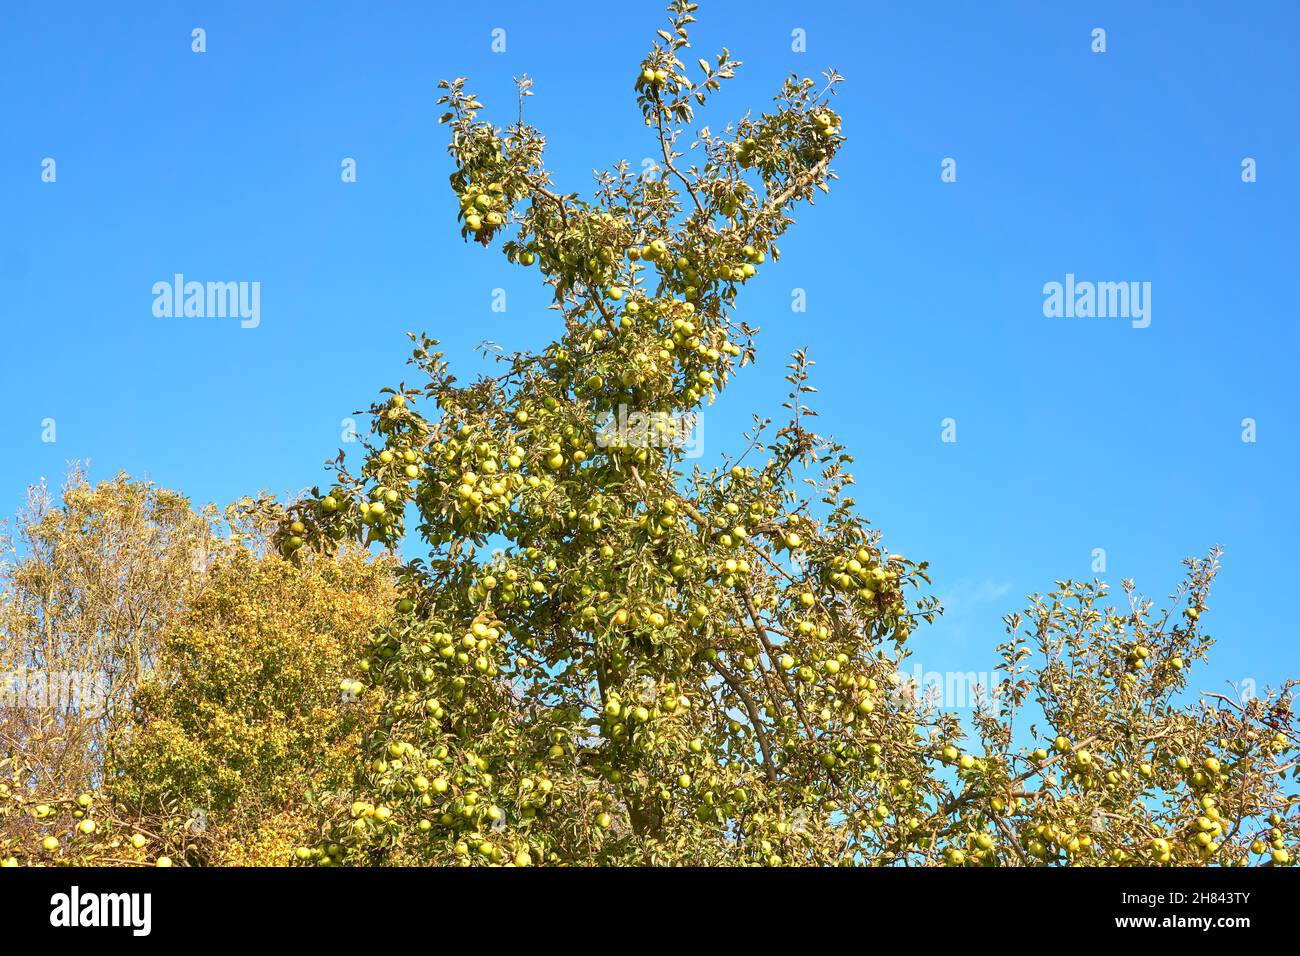 Lots of green apples on a tree Stock Photo